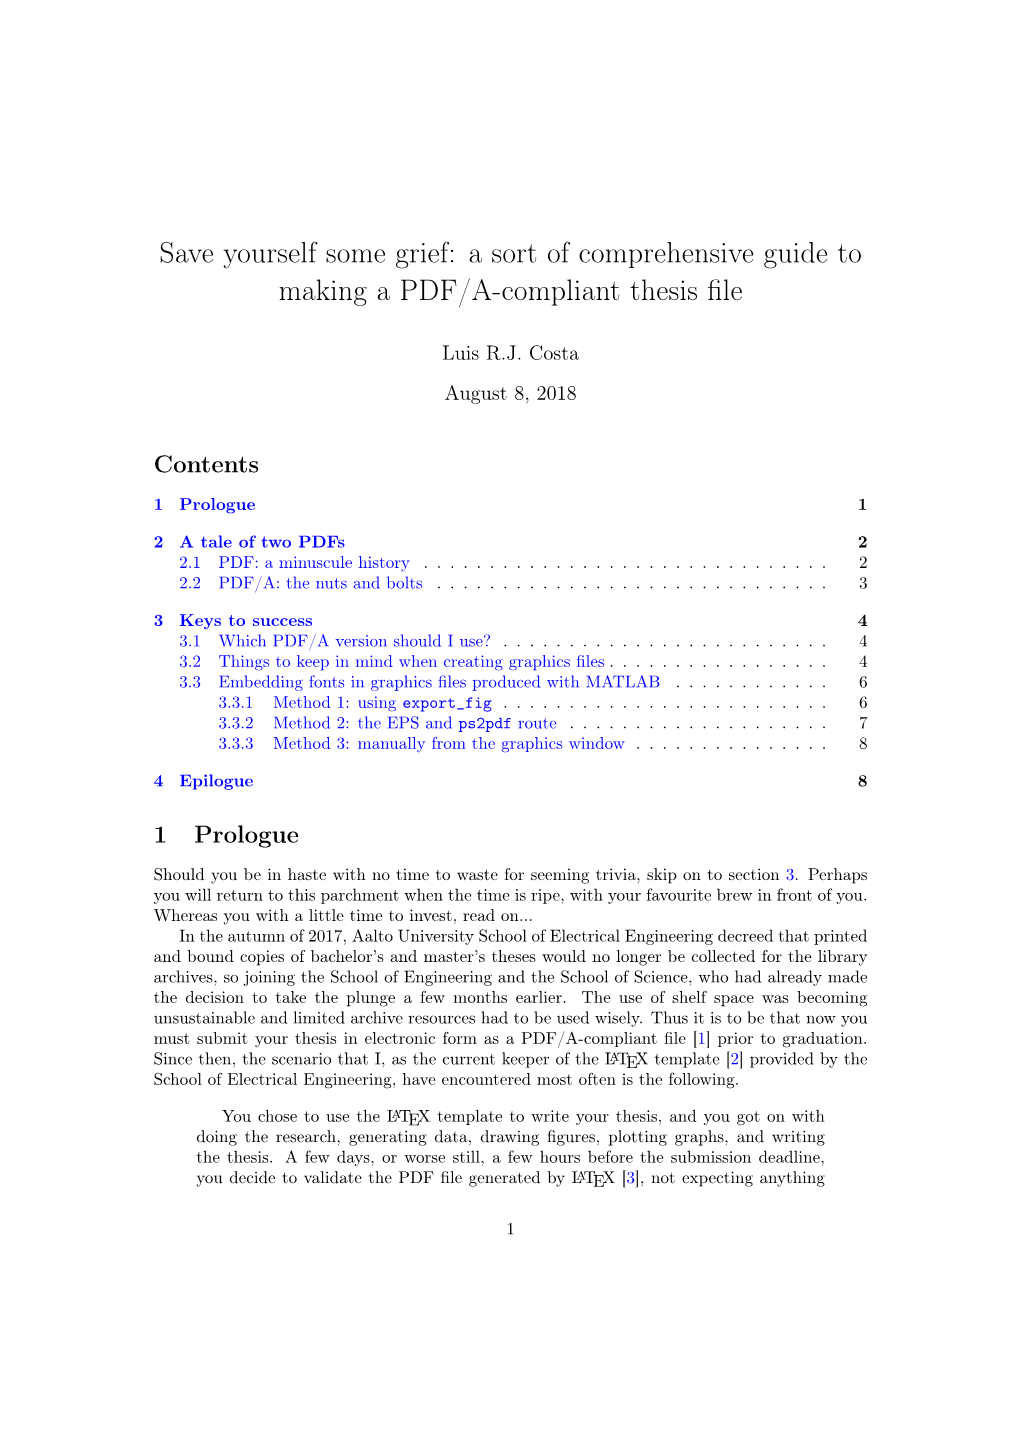 A Sort of Comprehensive Guide to Making a PDF/A-Compliant Thesis File